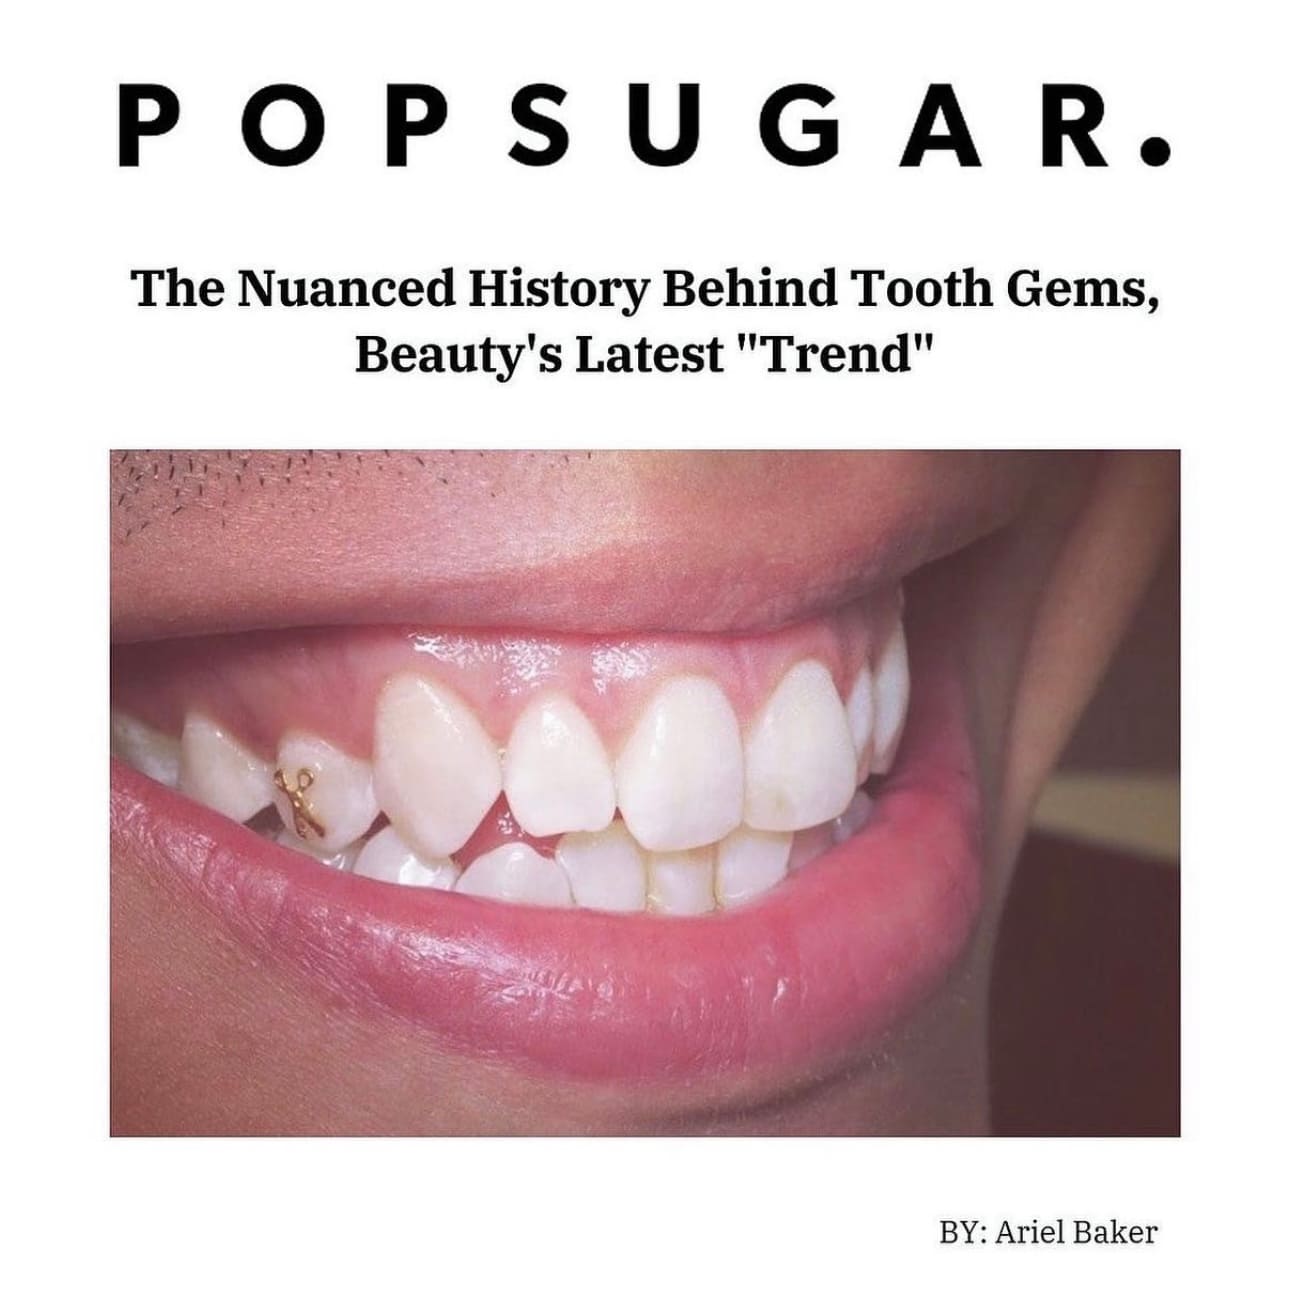 The Nuanced History Behind Tooth Gems, Beauty's Latest "Trend"